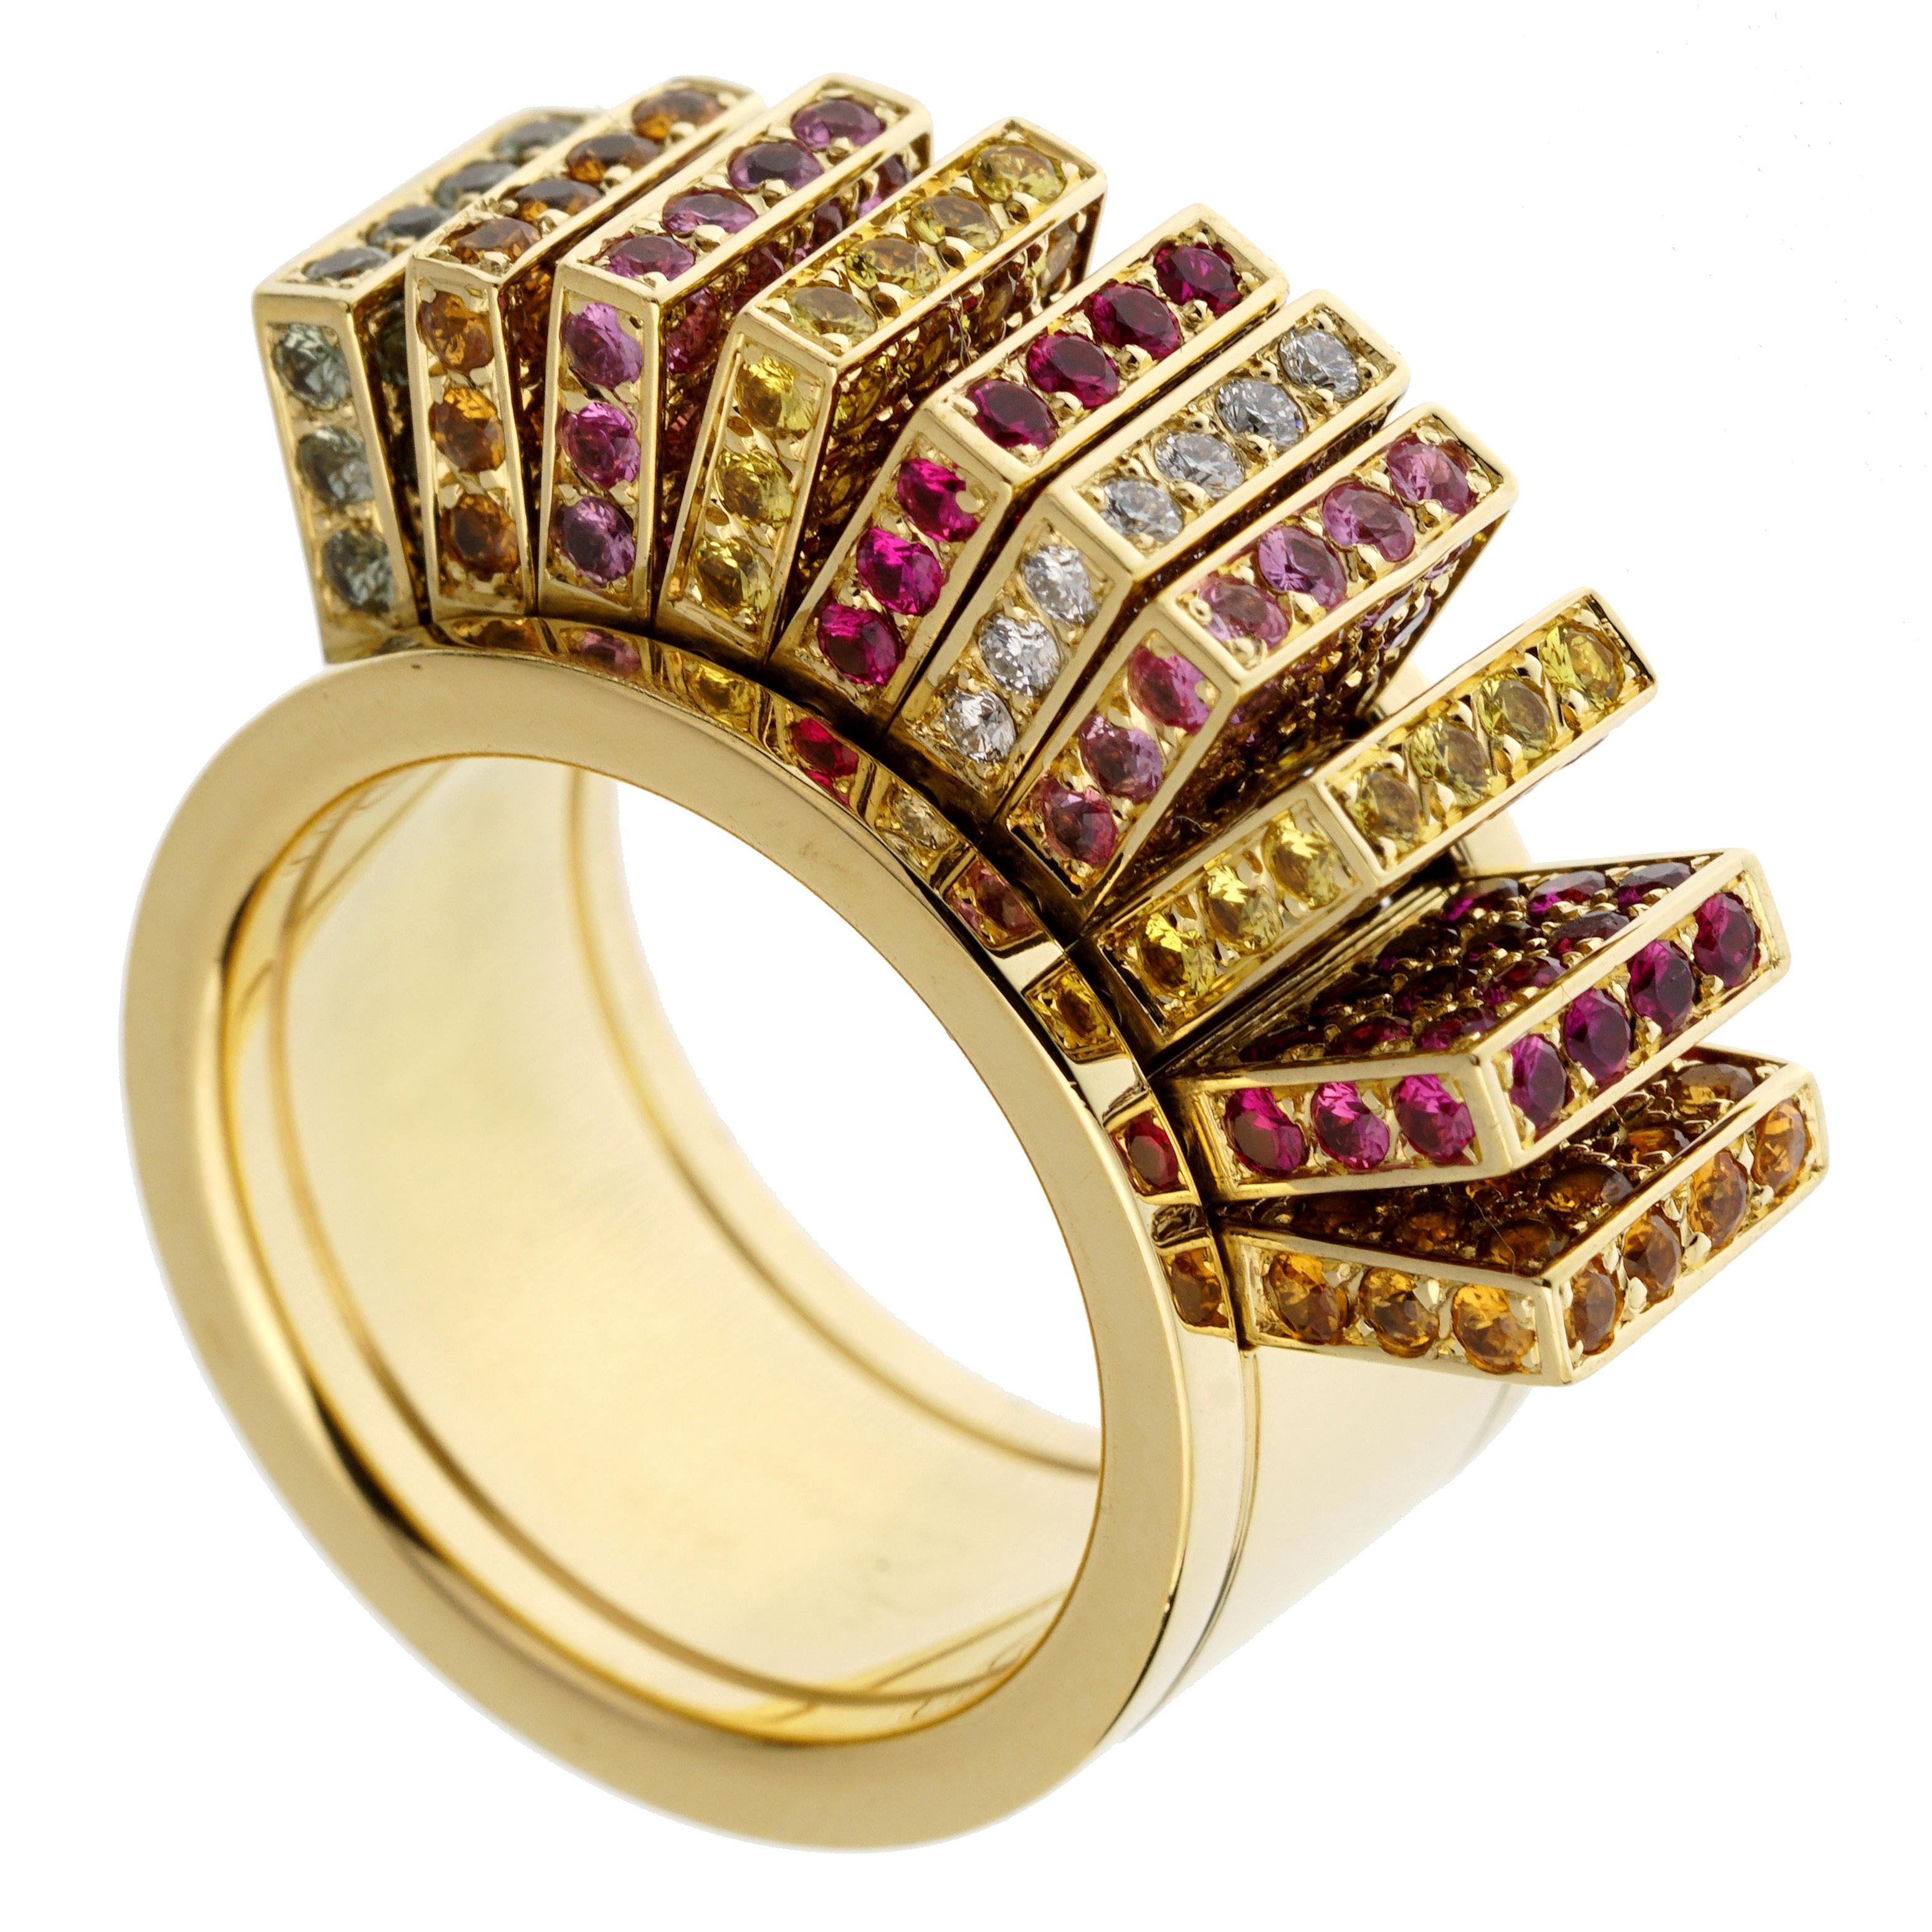 A fine cocktail ring Cartier Paris, the ring features moving panels each adorned with 34 sapphires of various colors. One panel is paved in diamonds. The heavy band is 10mm wide and measures a size 5. Full signed Cartier and numbered. Circa 2000.